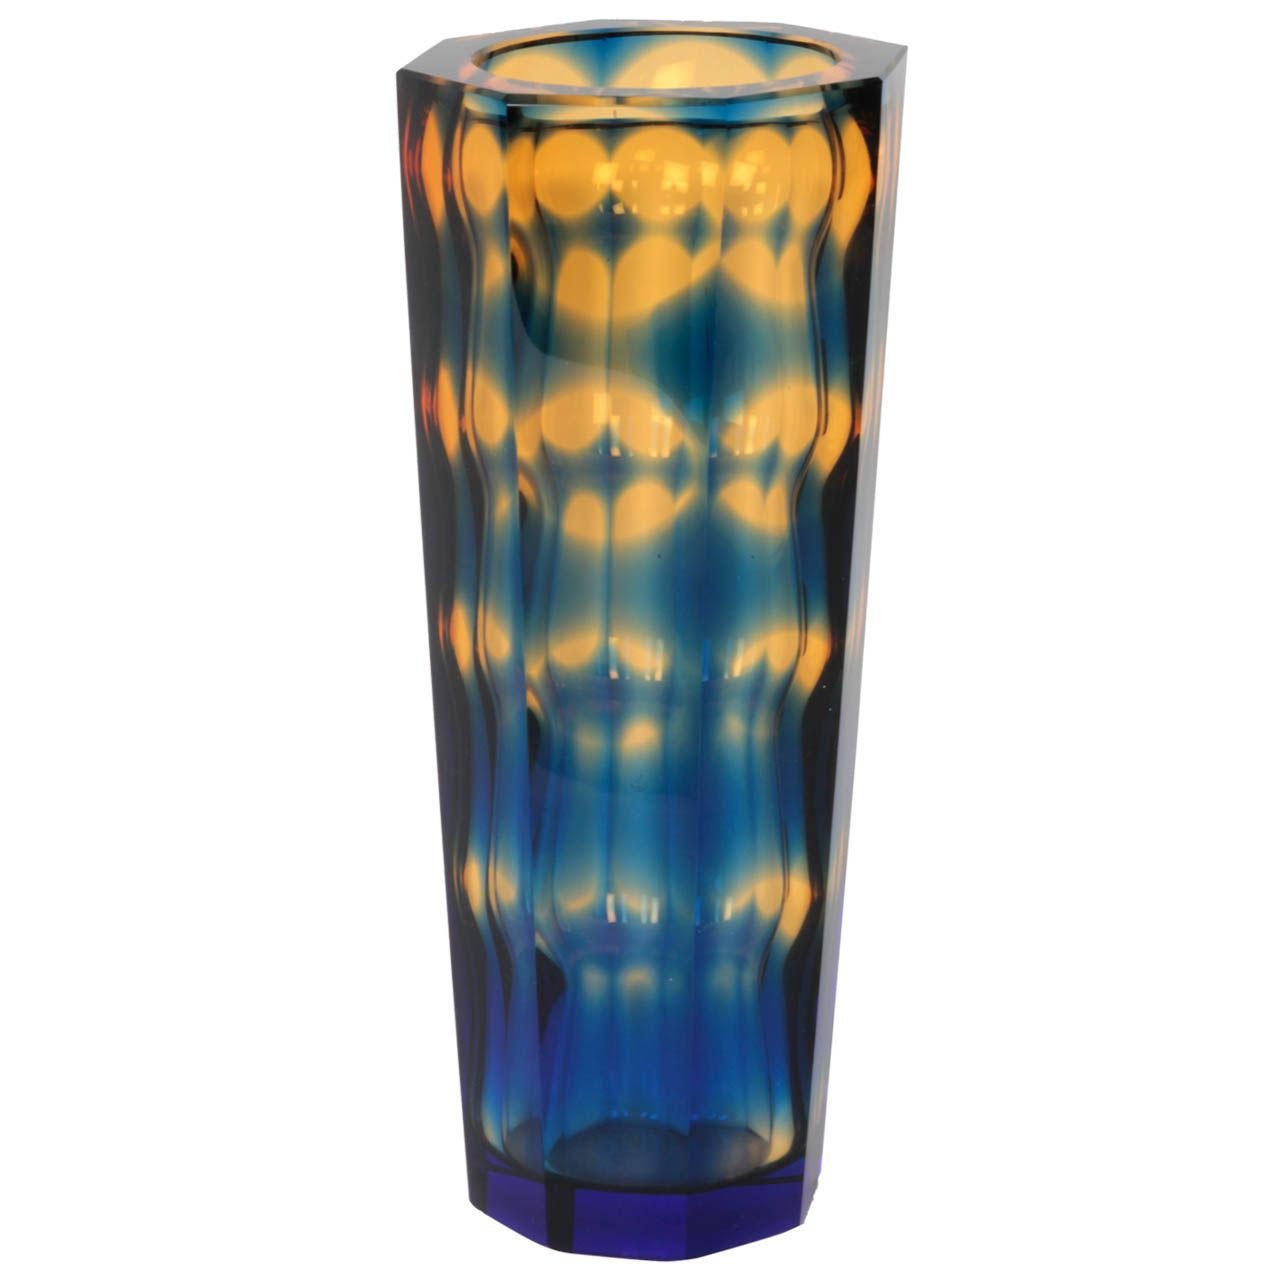 28 Trendy Modern Clear Glass Vases 2024 free download modern clear glass vases of an amazing sommerso glass vase in amber blue tones attributed to in an amazing sommerso glass vase in amber blue tones attributed to oldrich lipsky